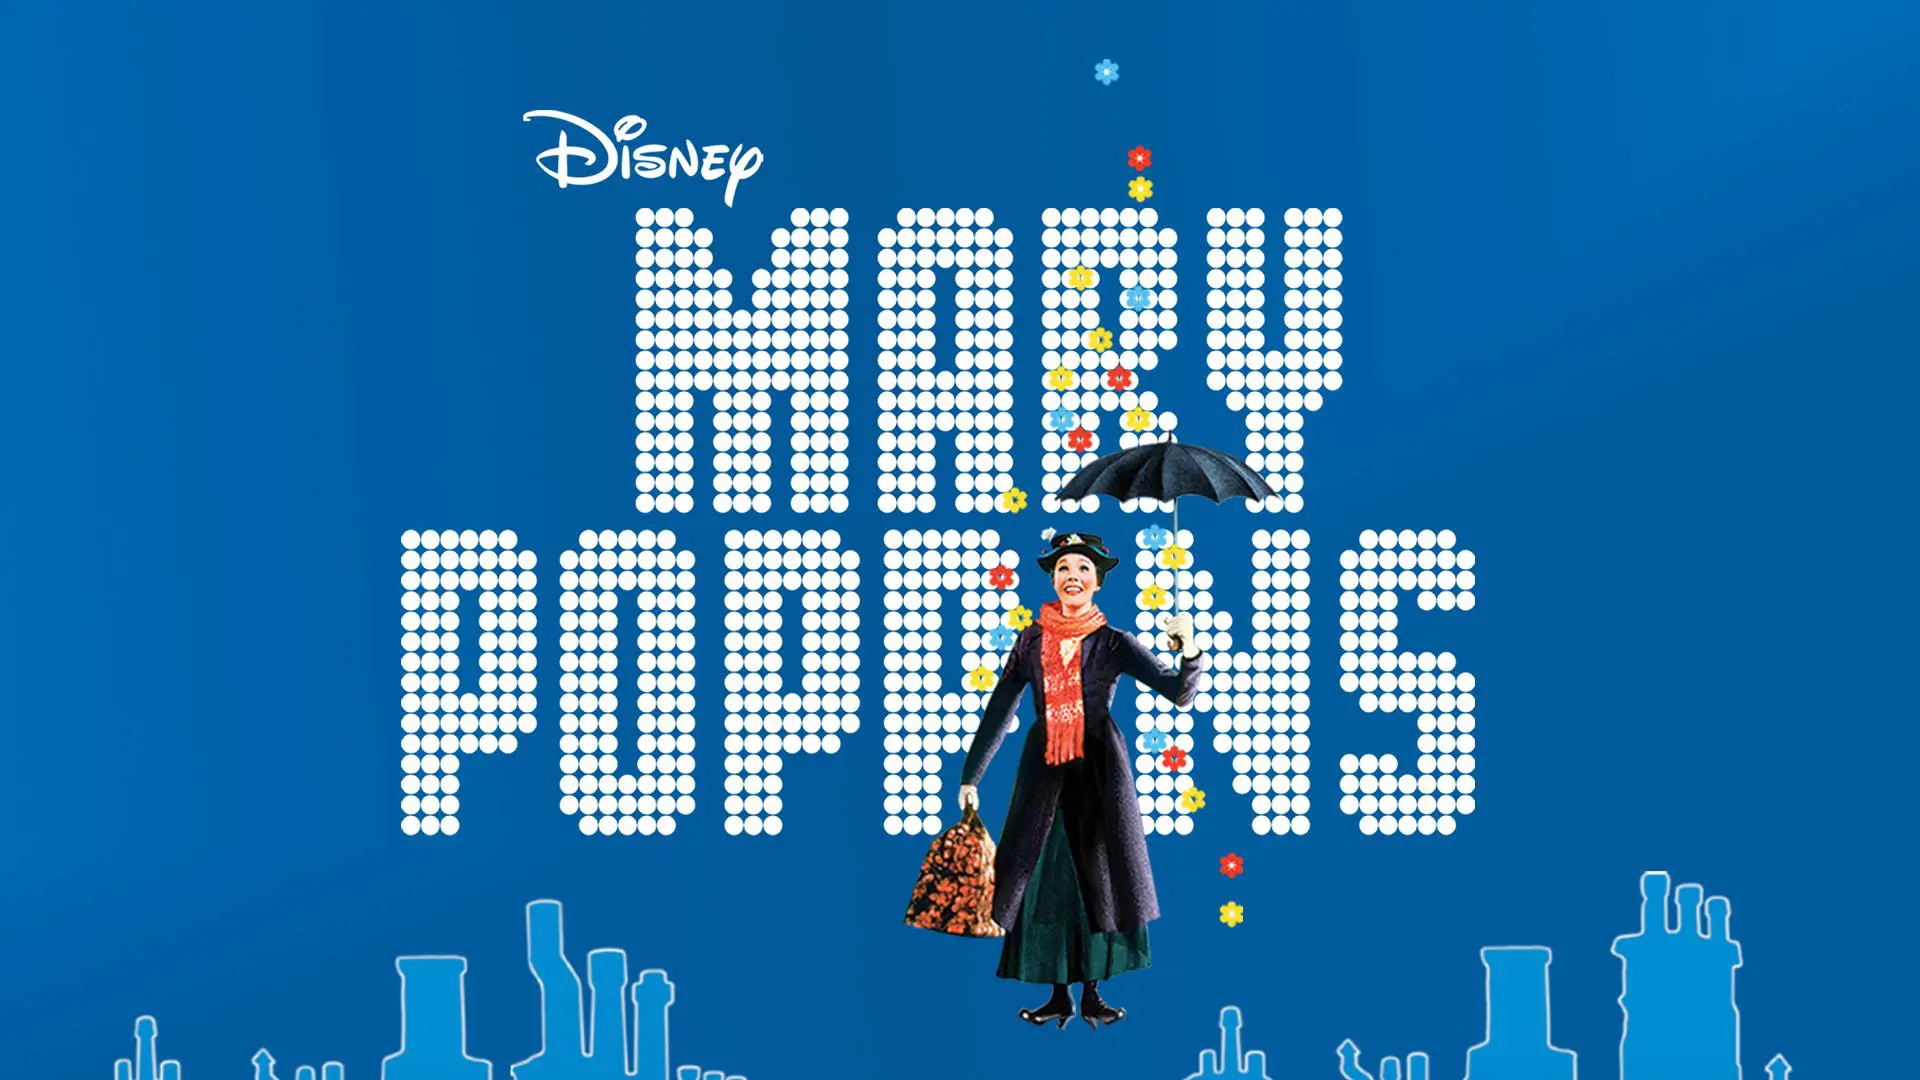 The music in Marry Poppins was given by Richard M. Sherman and Robert B. Sherman